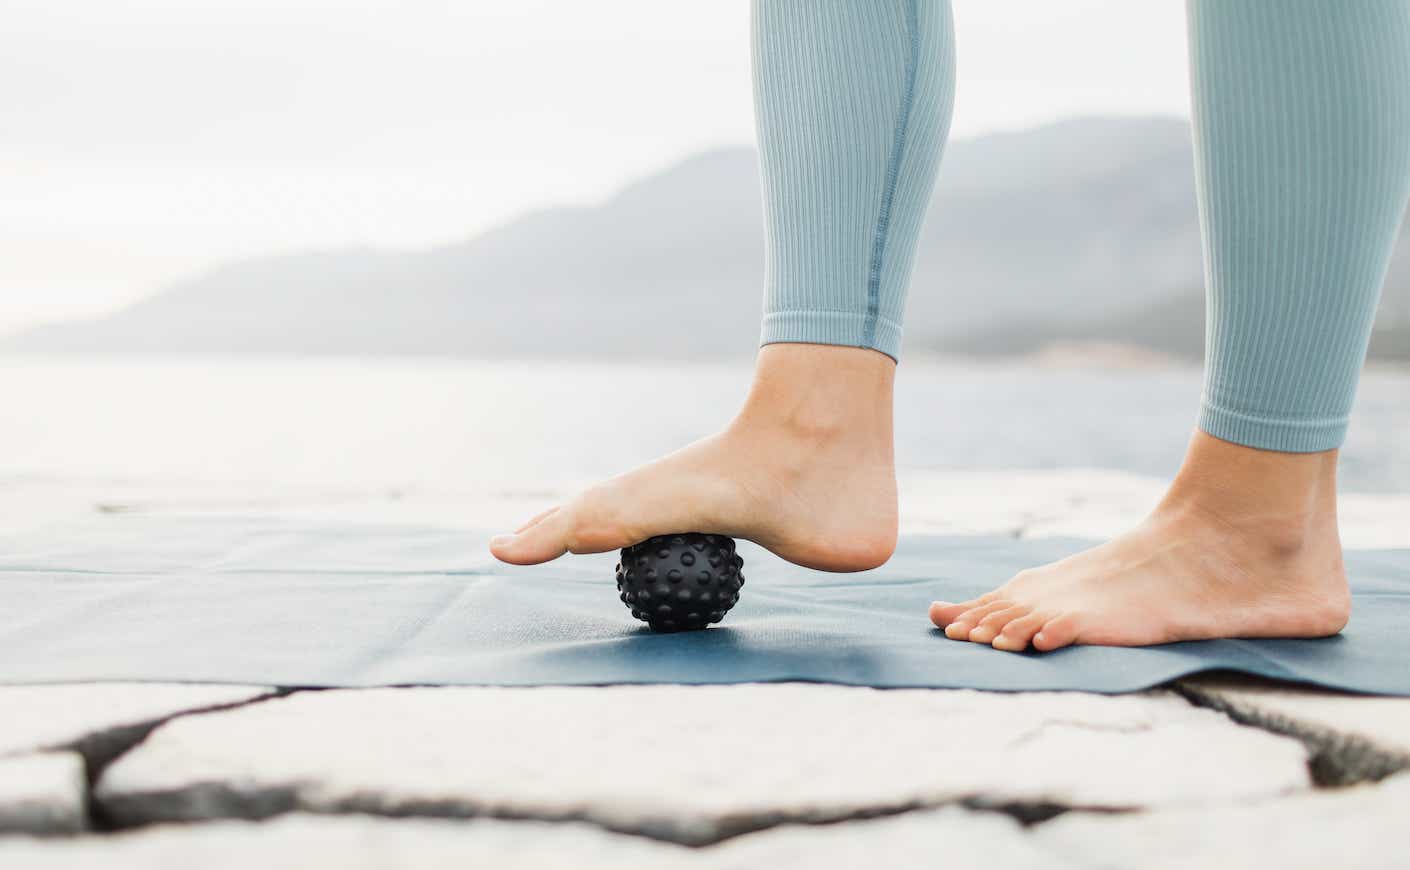 A close up of someone's lower legs and feet as they do footwork with a small black ball with a foggy beach in the backgound.